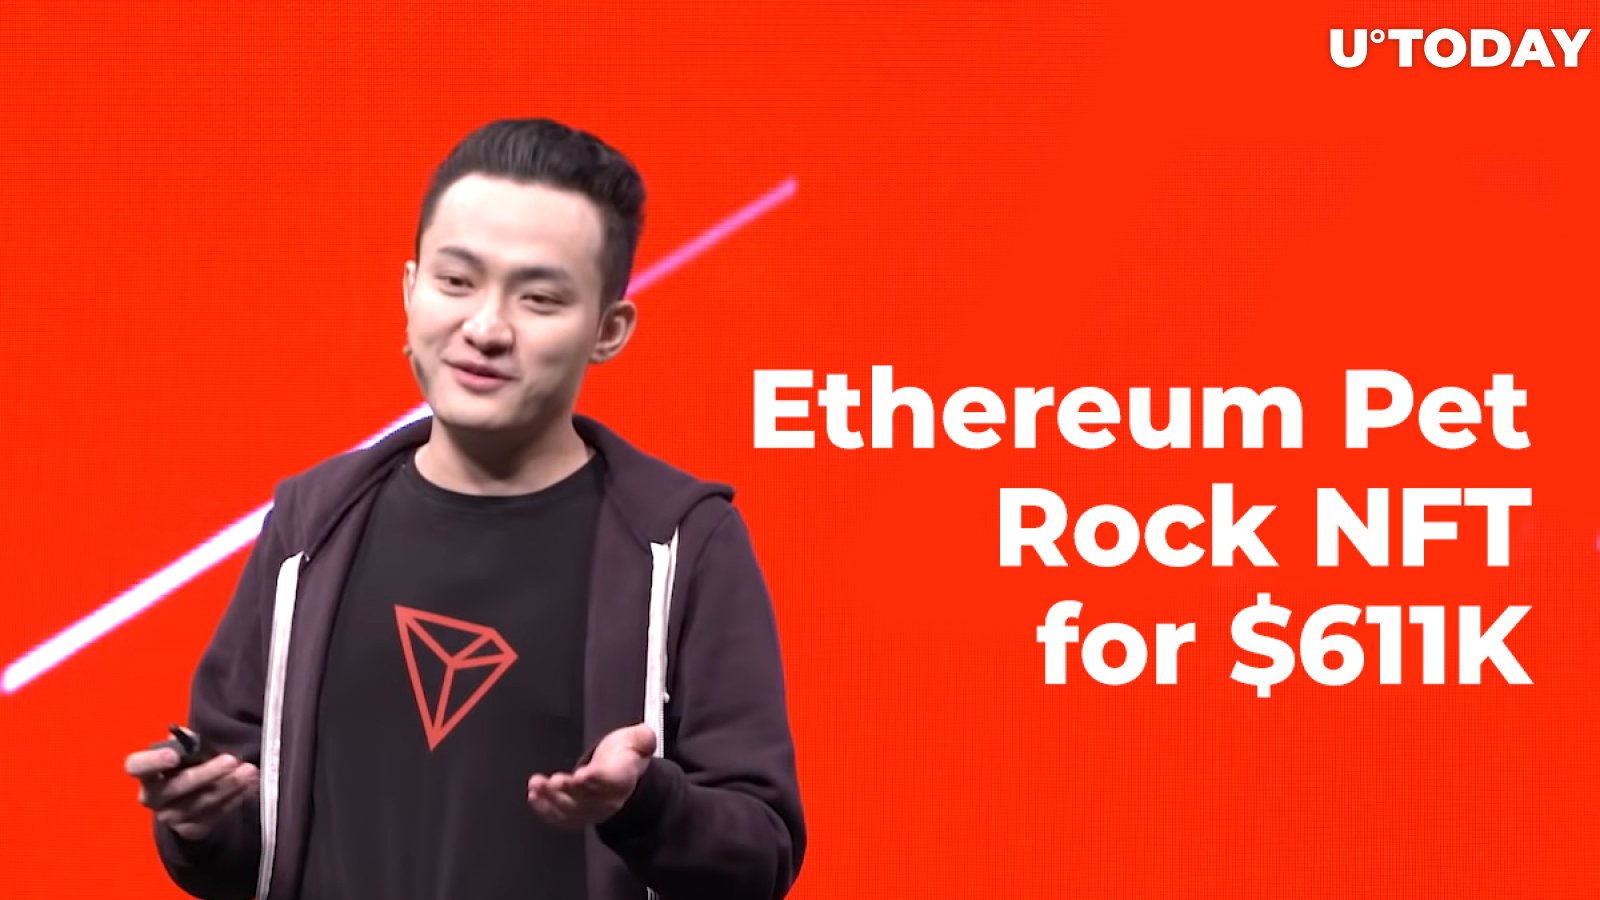 Justin Sun Brags About Buying Ethereum Pet Rock NFT for $611K